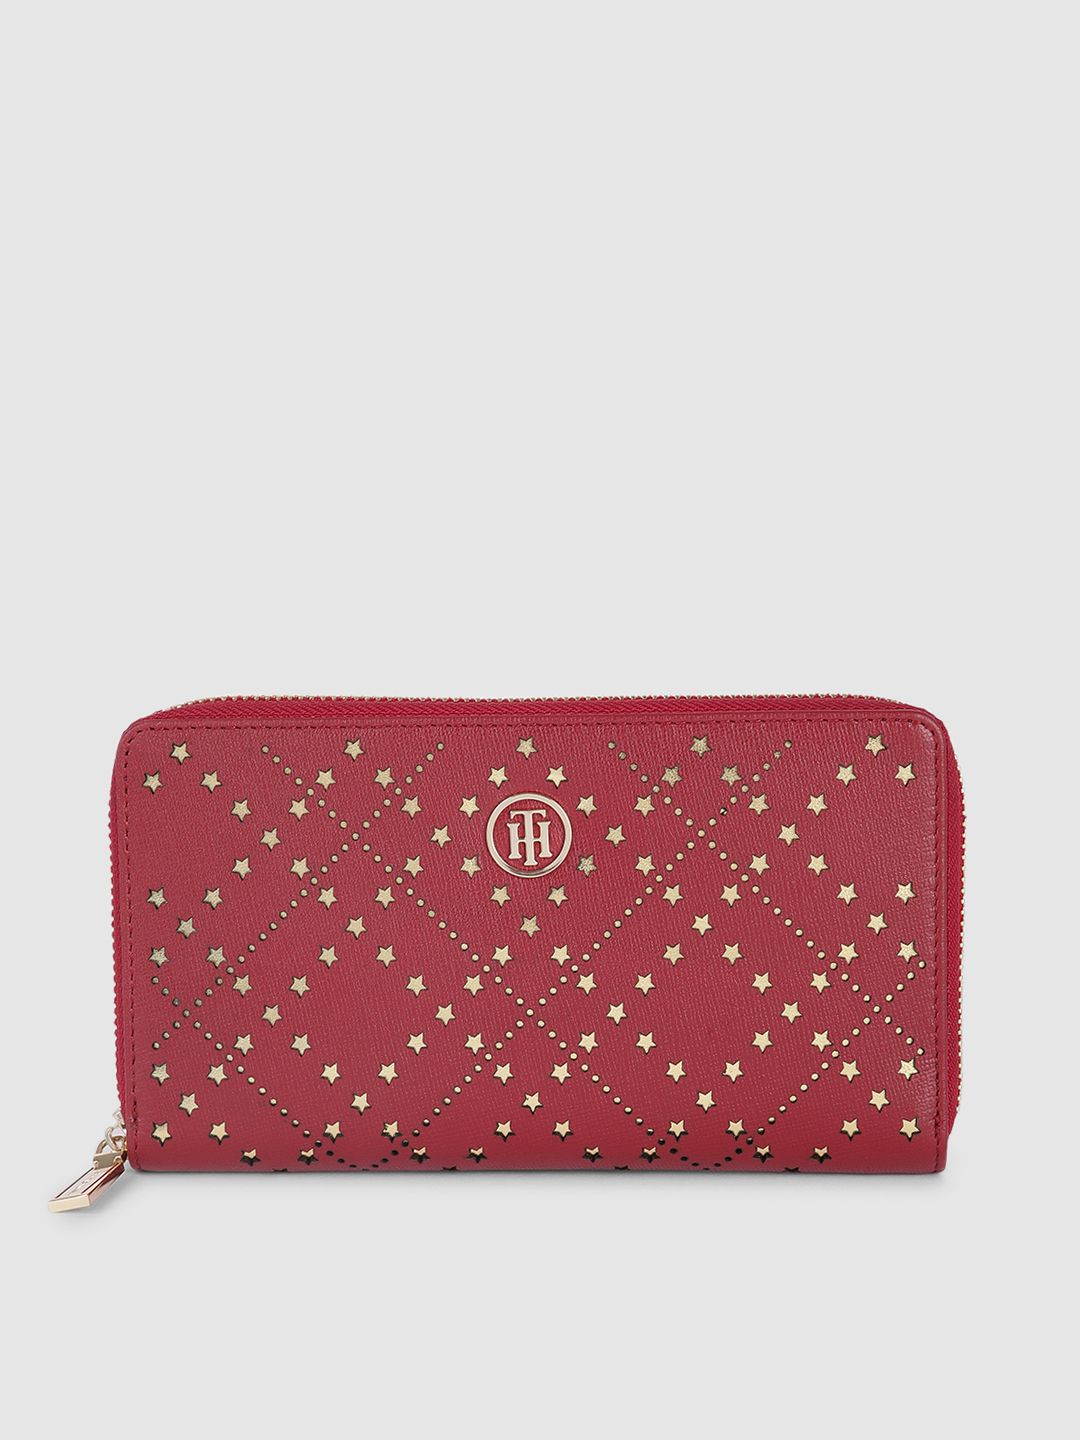 Tommy Hilfiger Women Burgundy Geometric Printed Leather Zip Around Wallet Price in India